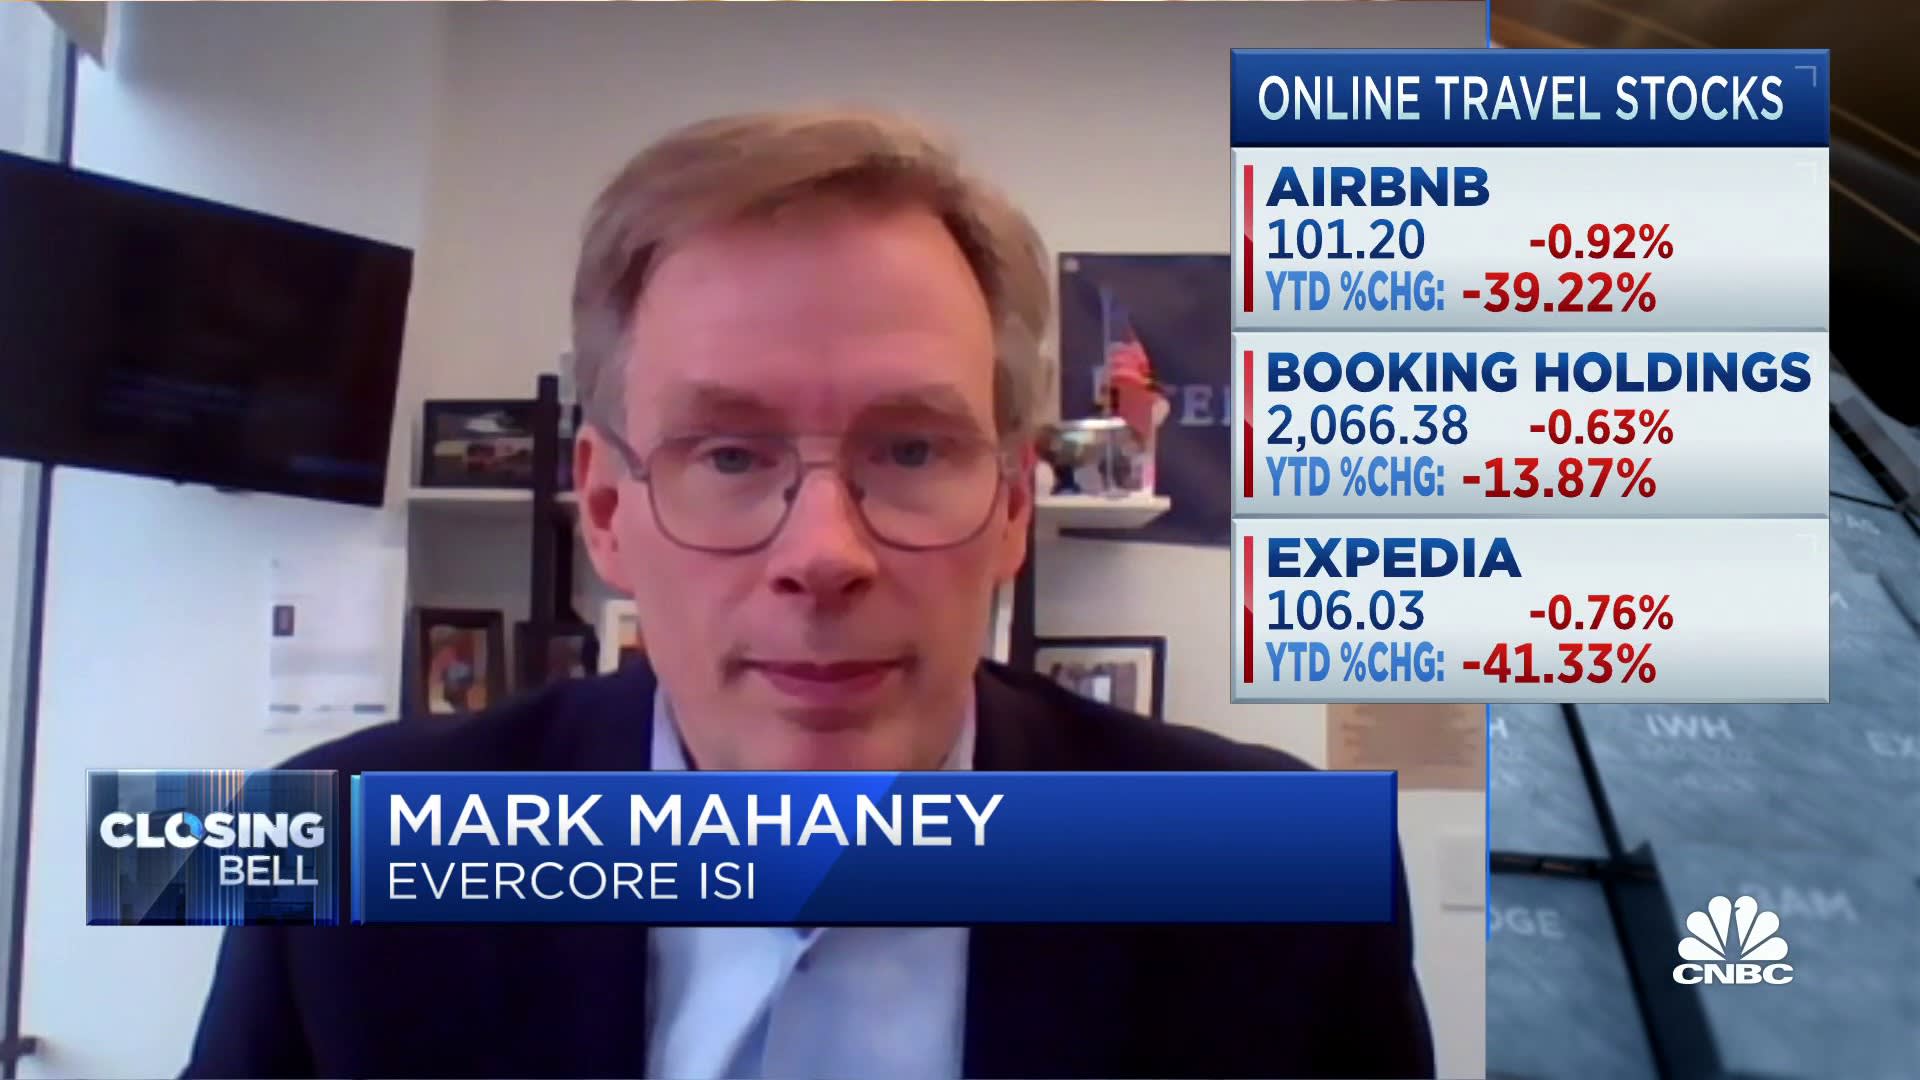 Journey corporations chopping prices early makes them enticing, says Evercore’s Mark Mahaney